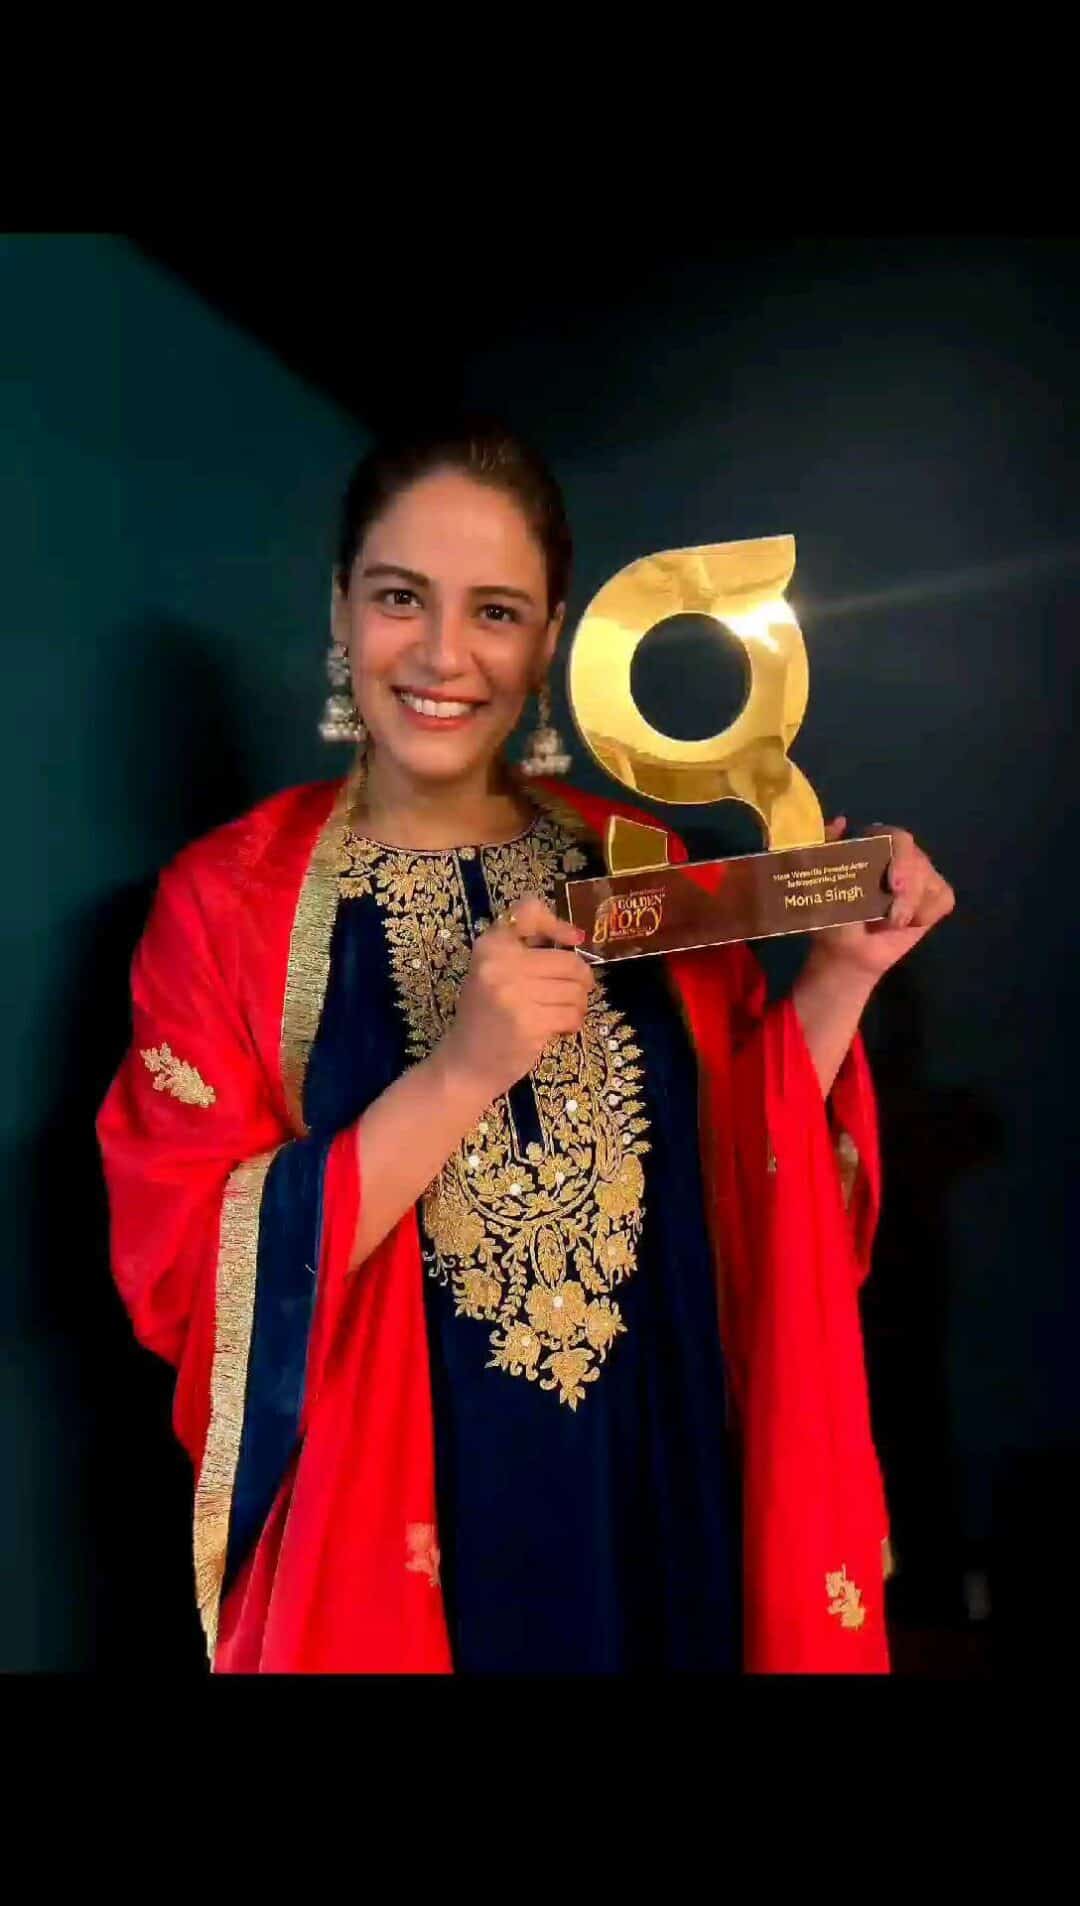 Mona Singh - Career, Awards, And Achievements